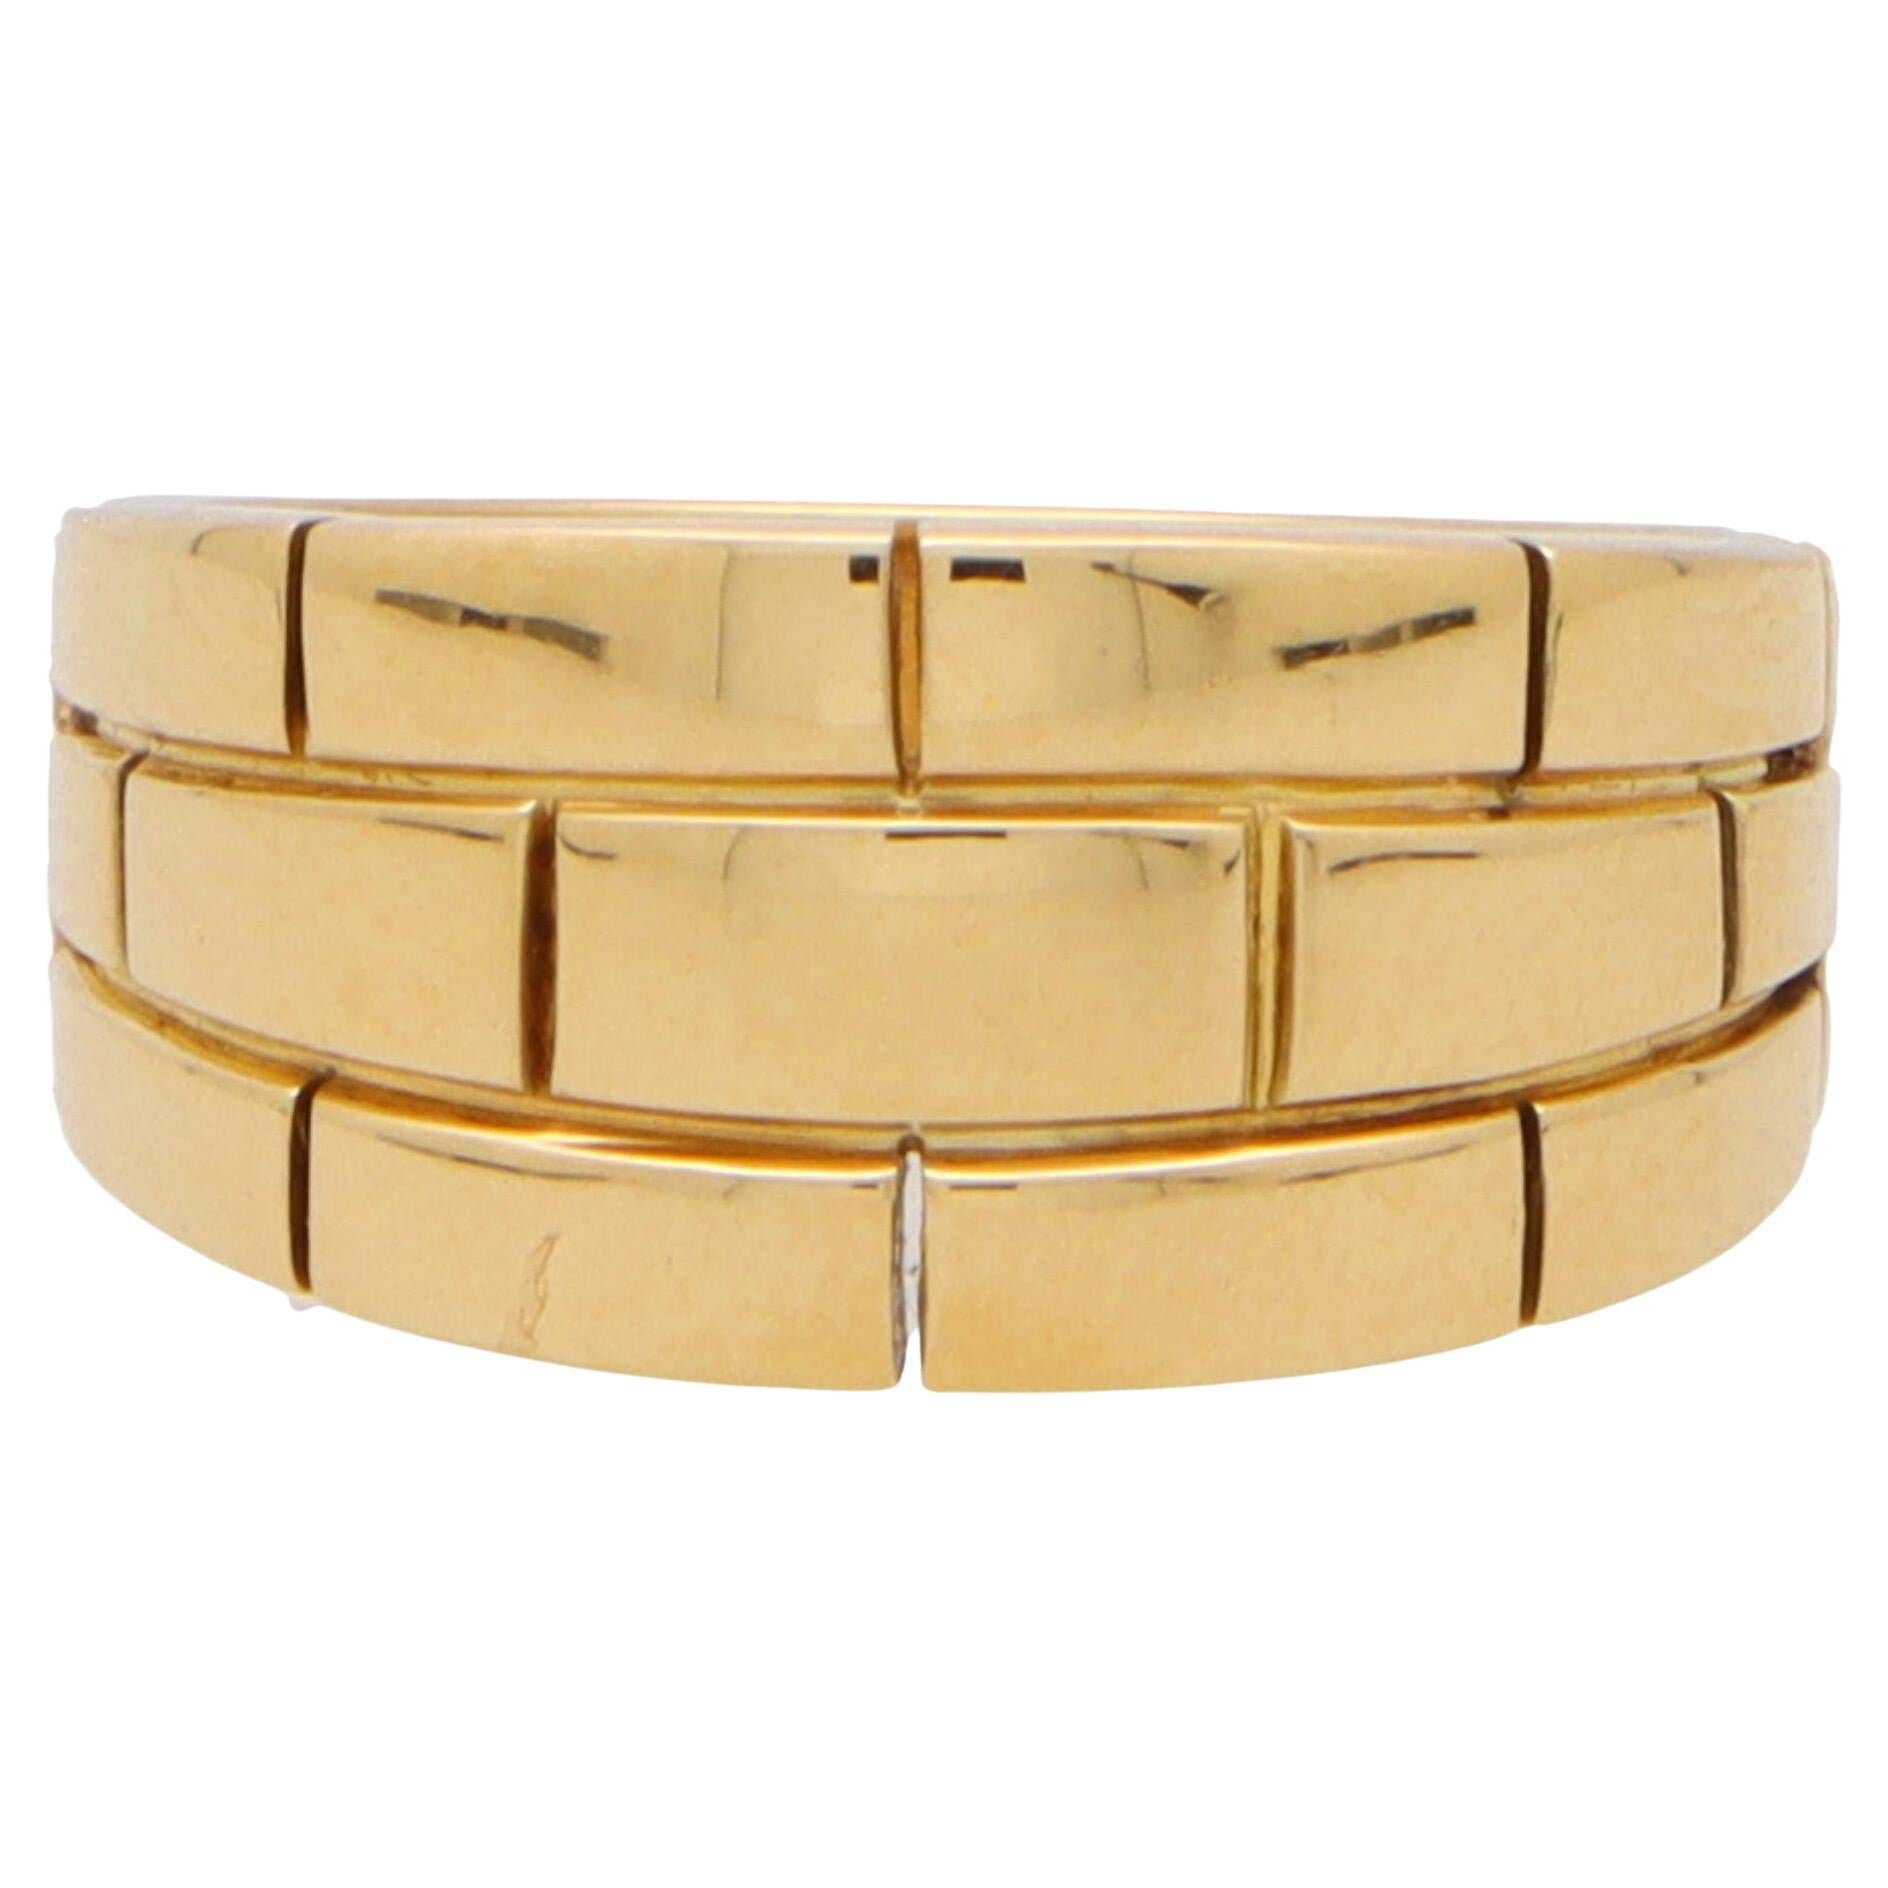 Vintage Cartier Maillon Panthère Brick Link Ring in 18k Yellow Gold